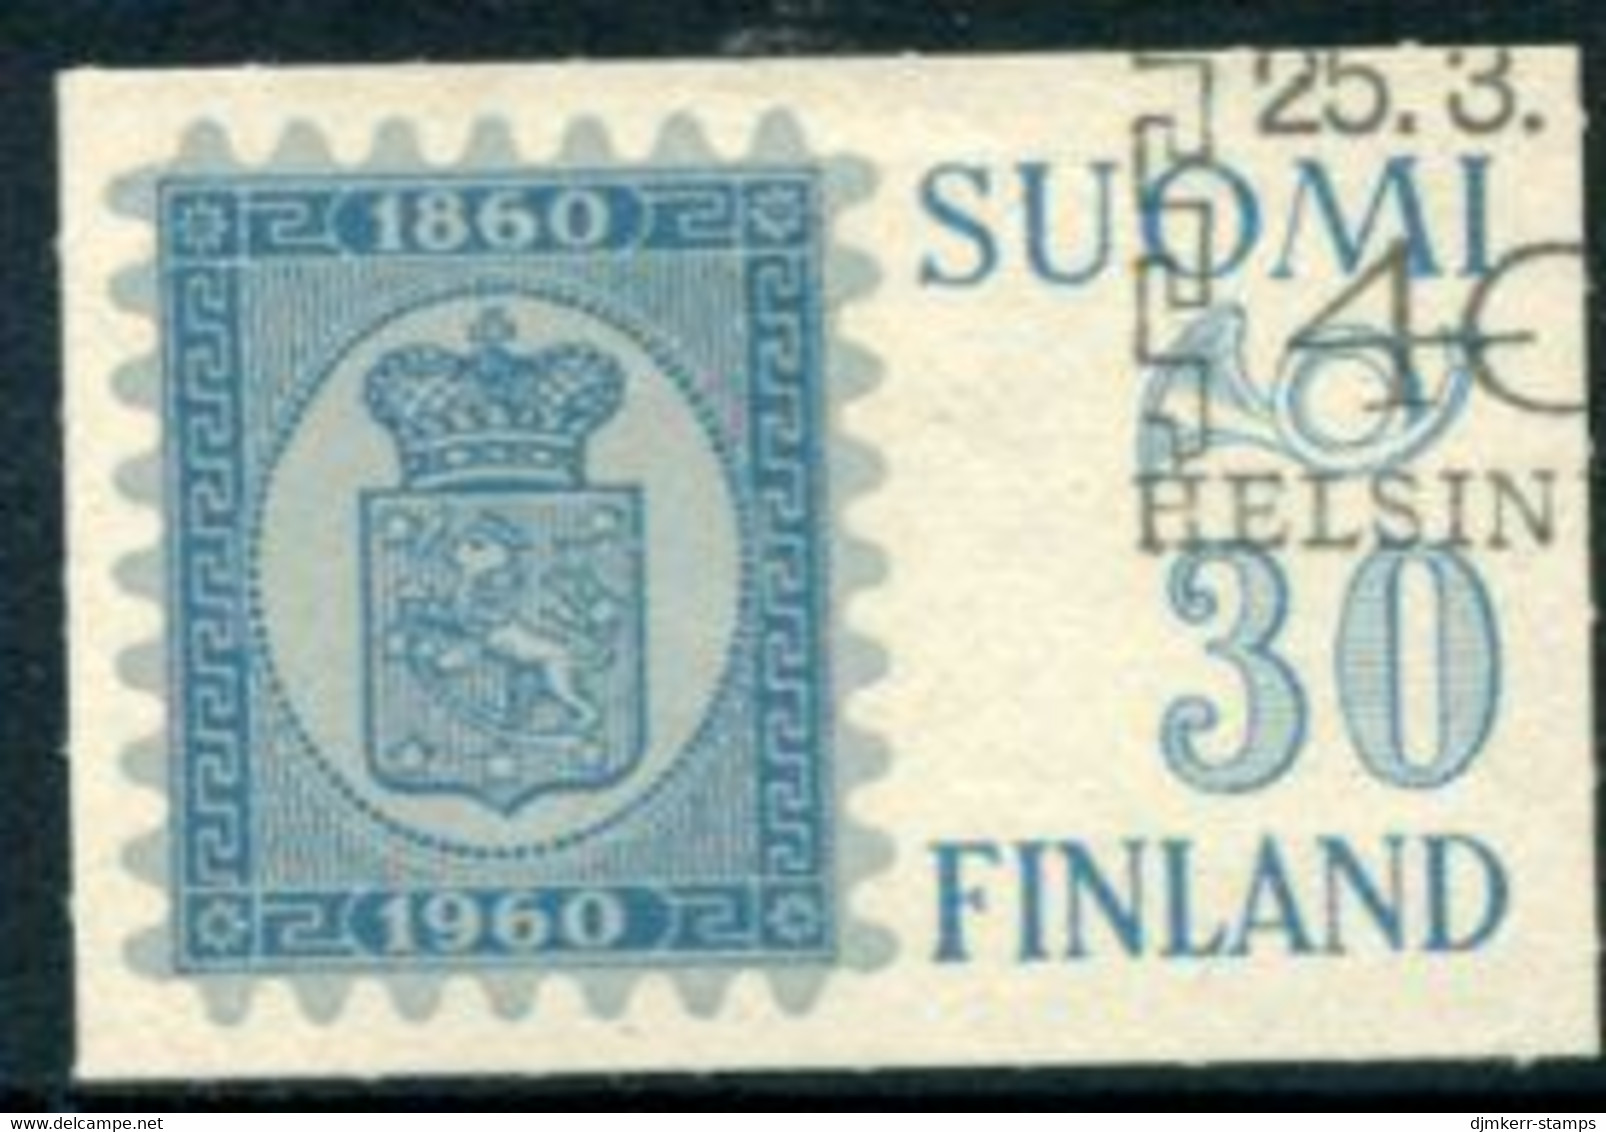 FINLAND 1960 Helsinki Philatelic Exhibition Used.. .  Michel 516 - Used Stamps